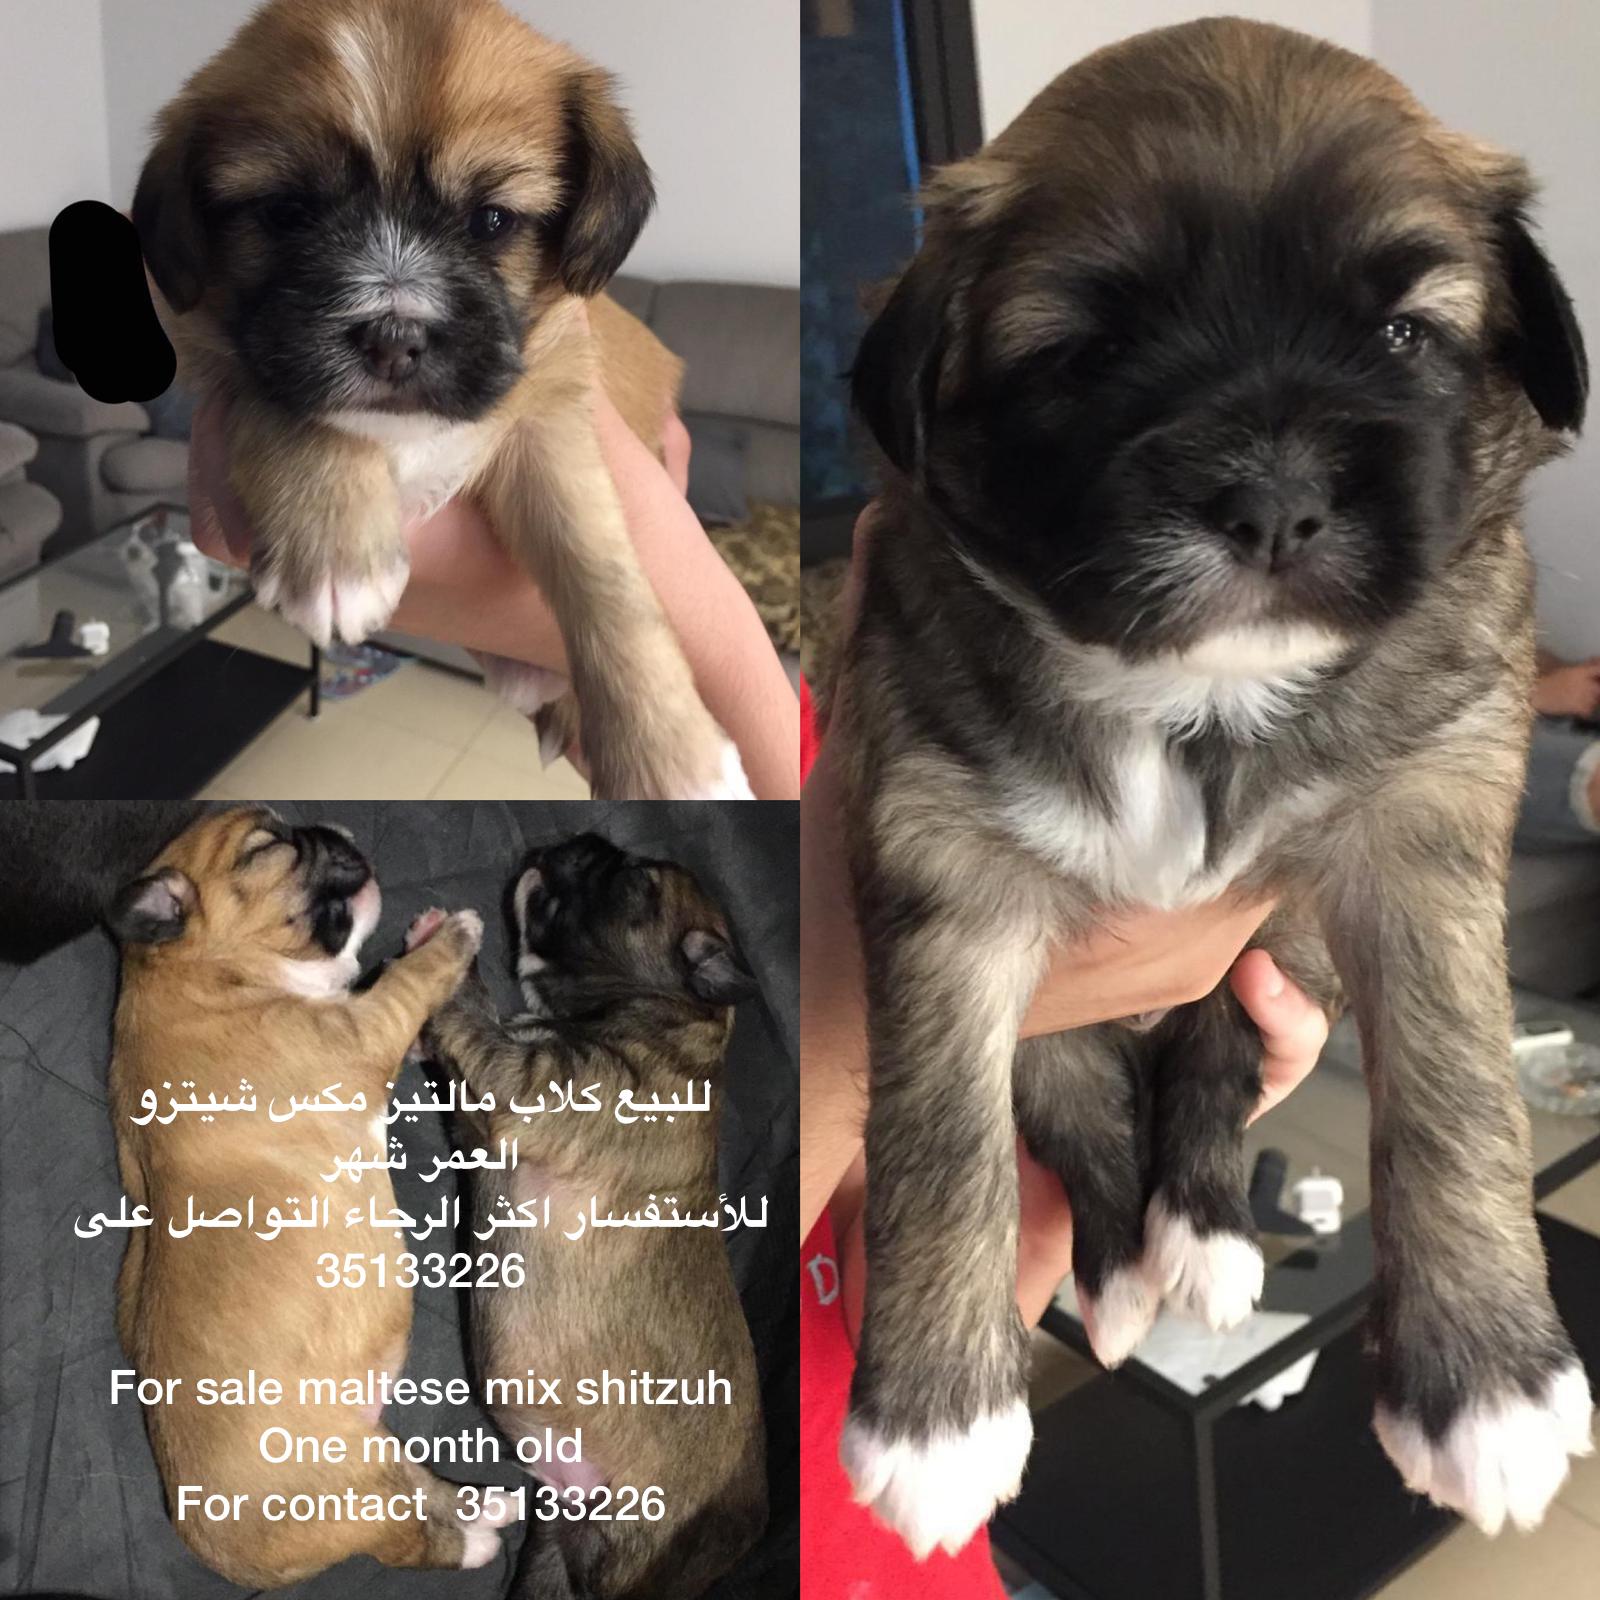 Maltese mix shitzuh dogs for sale